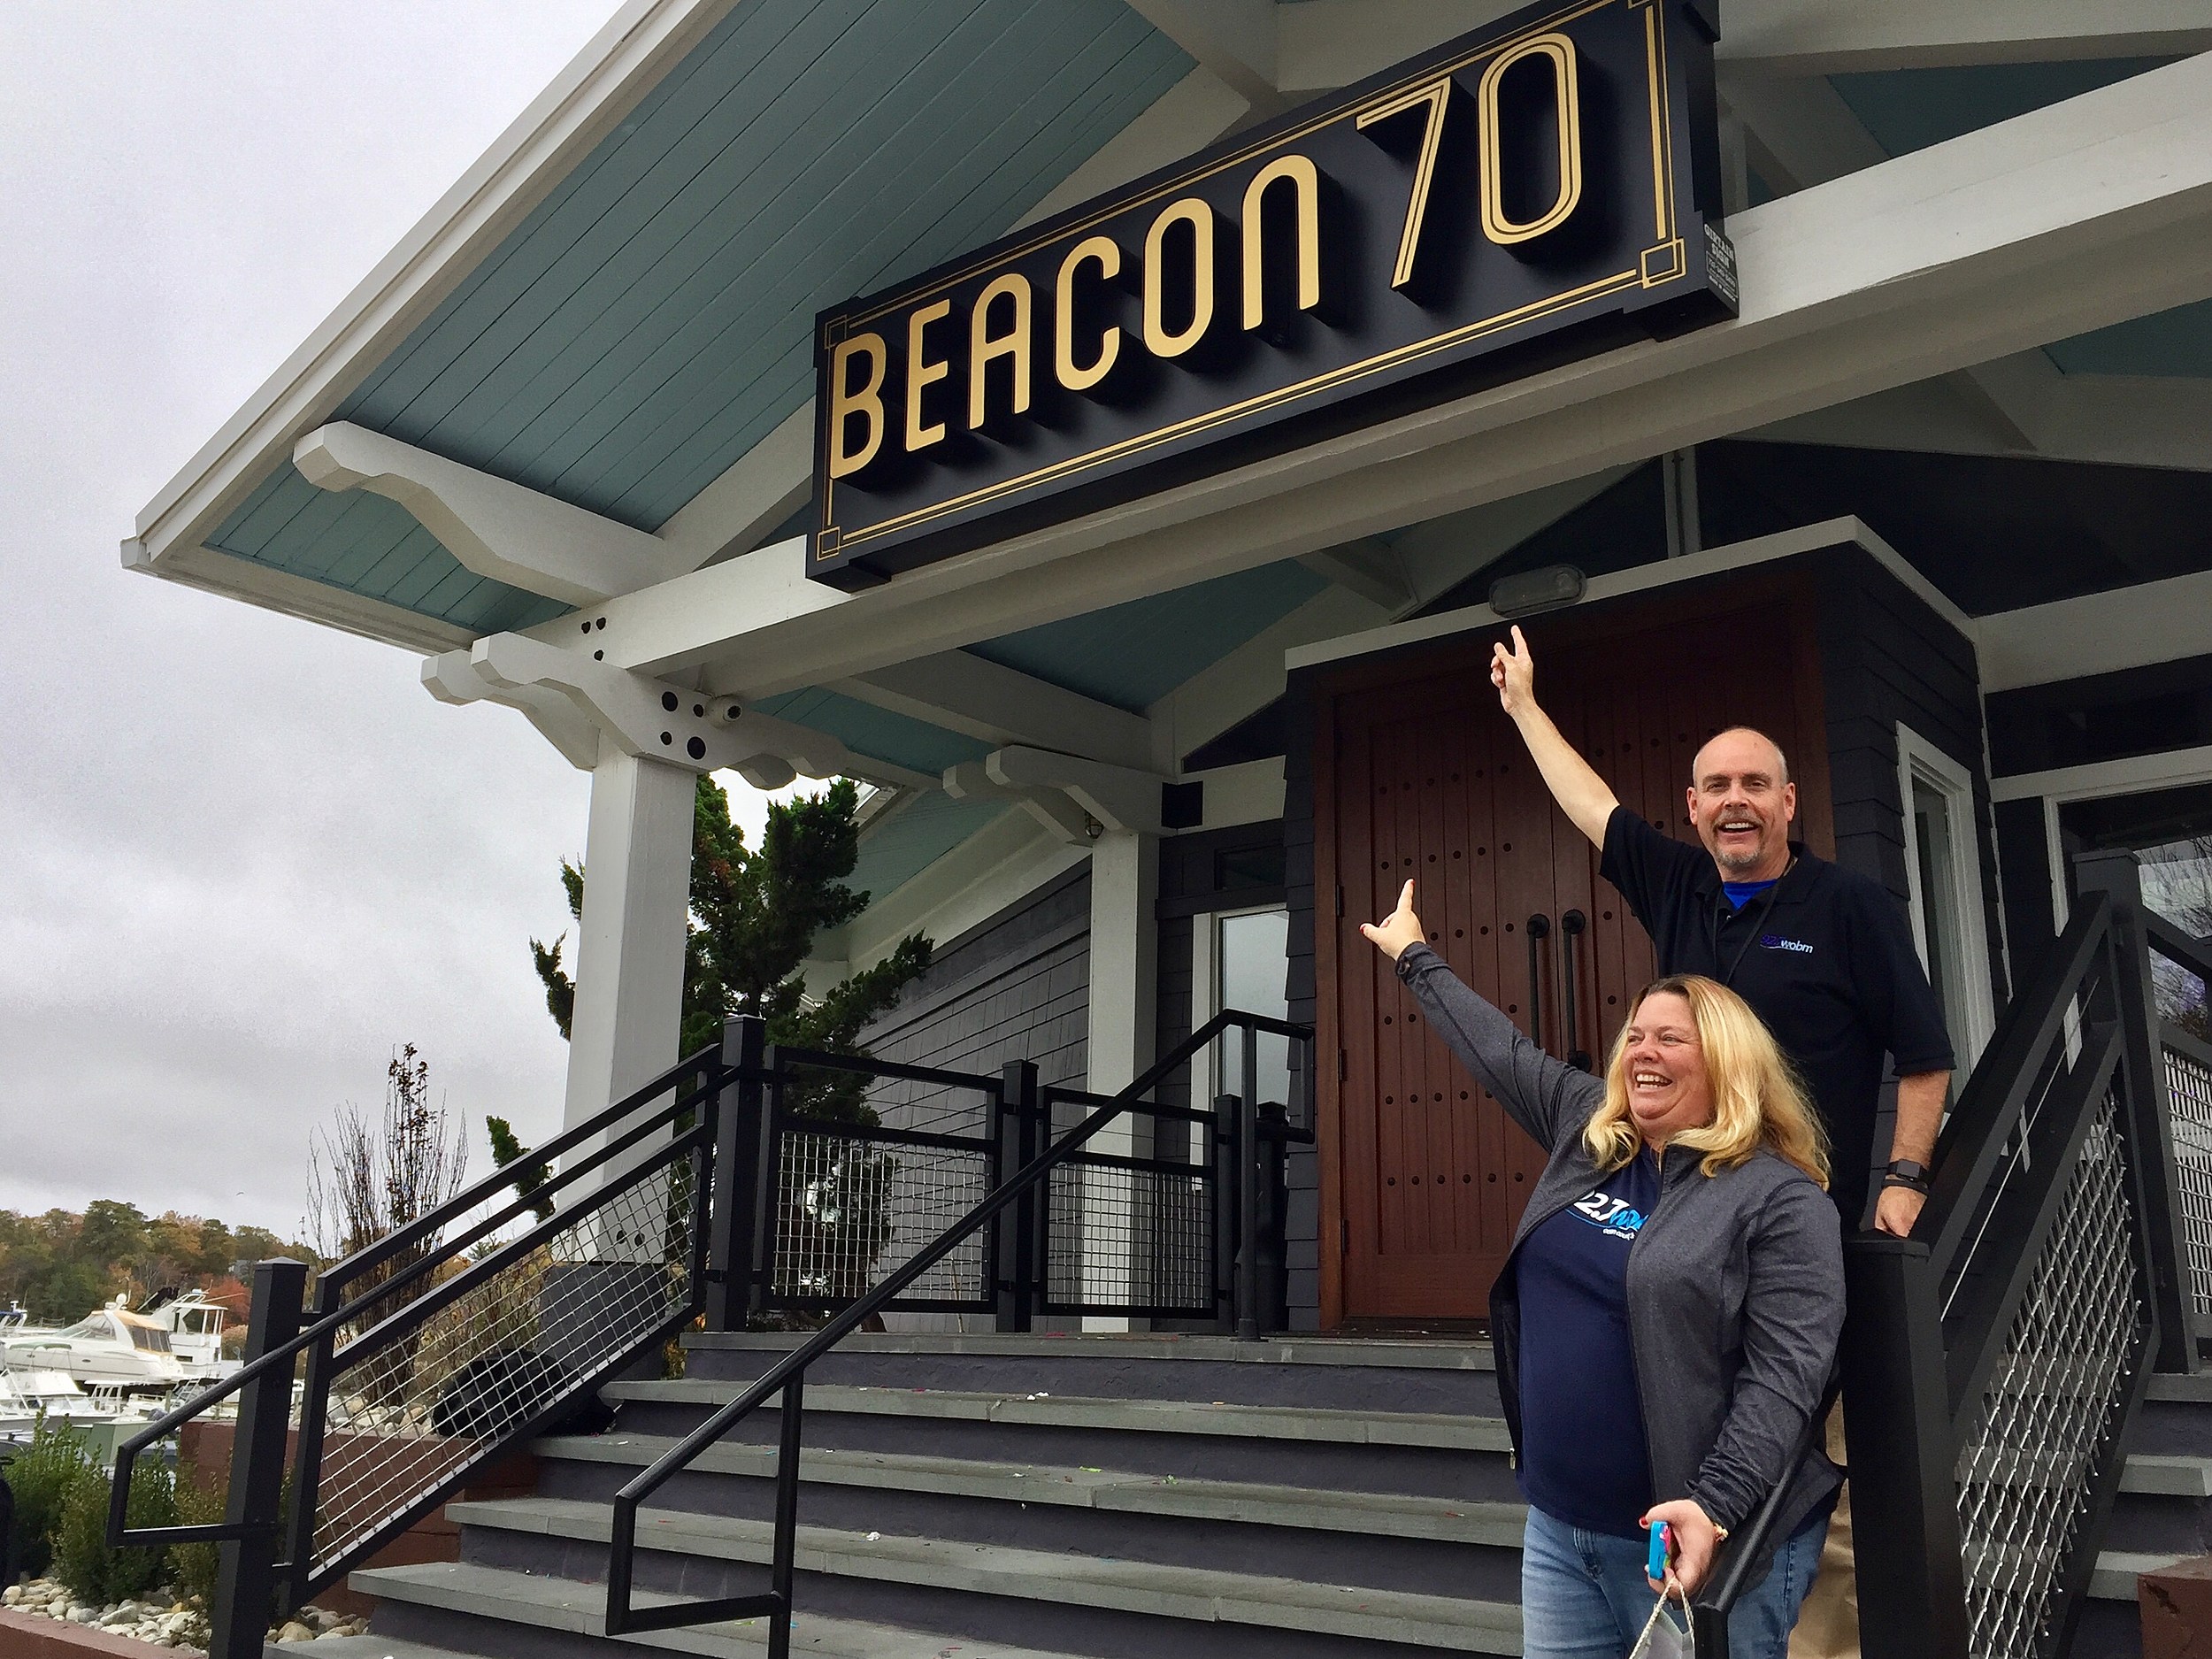 Beacon 70, New Bar and Restaurant, Opens at Former 'Pilot House